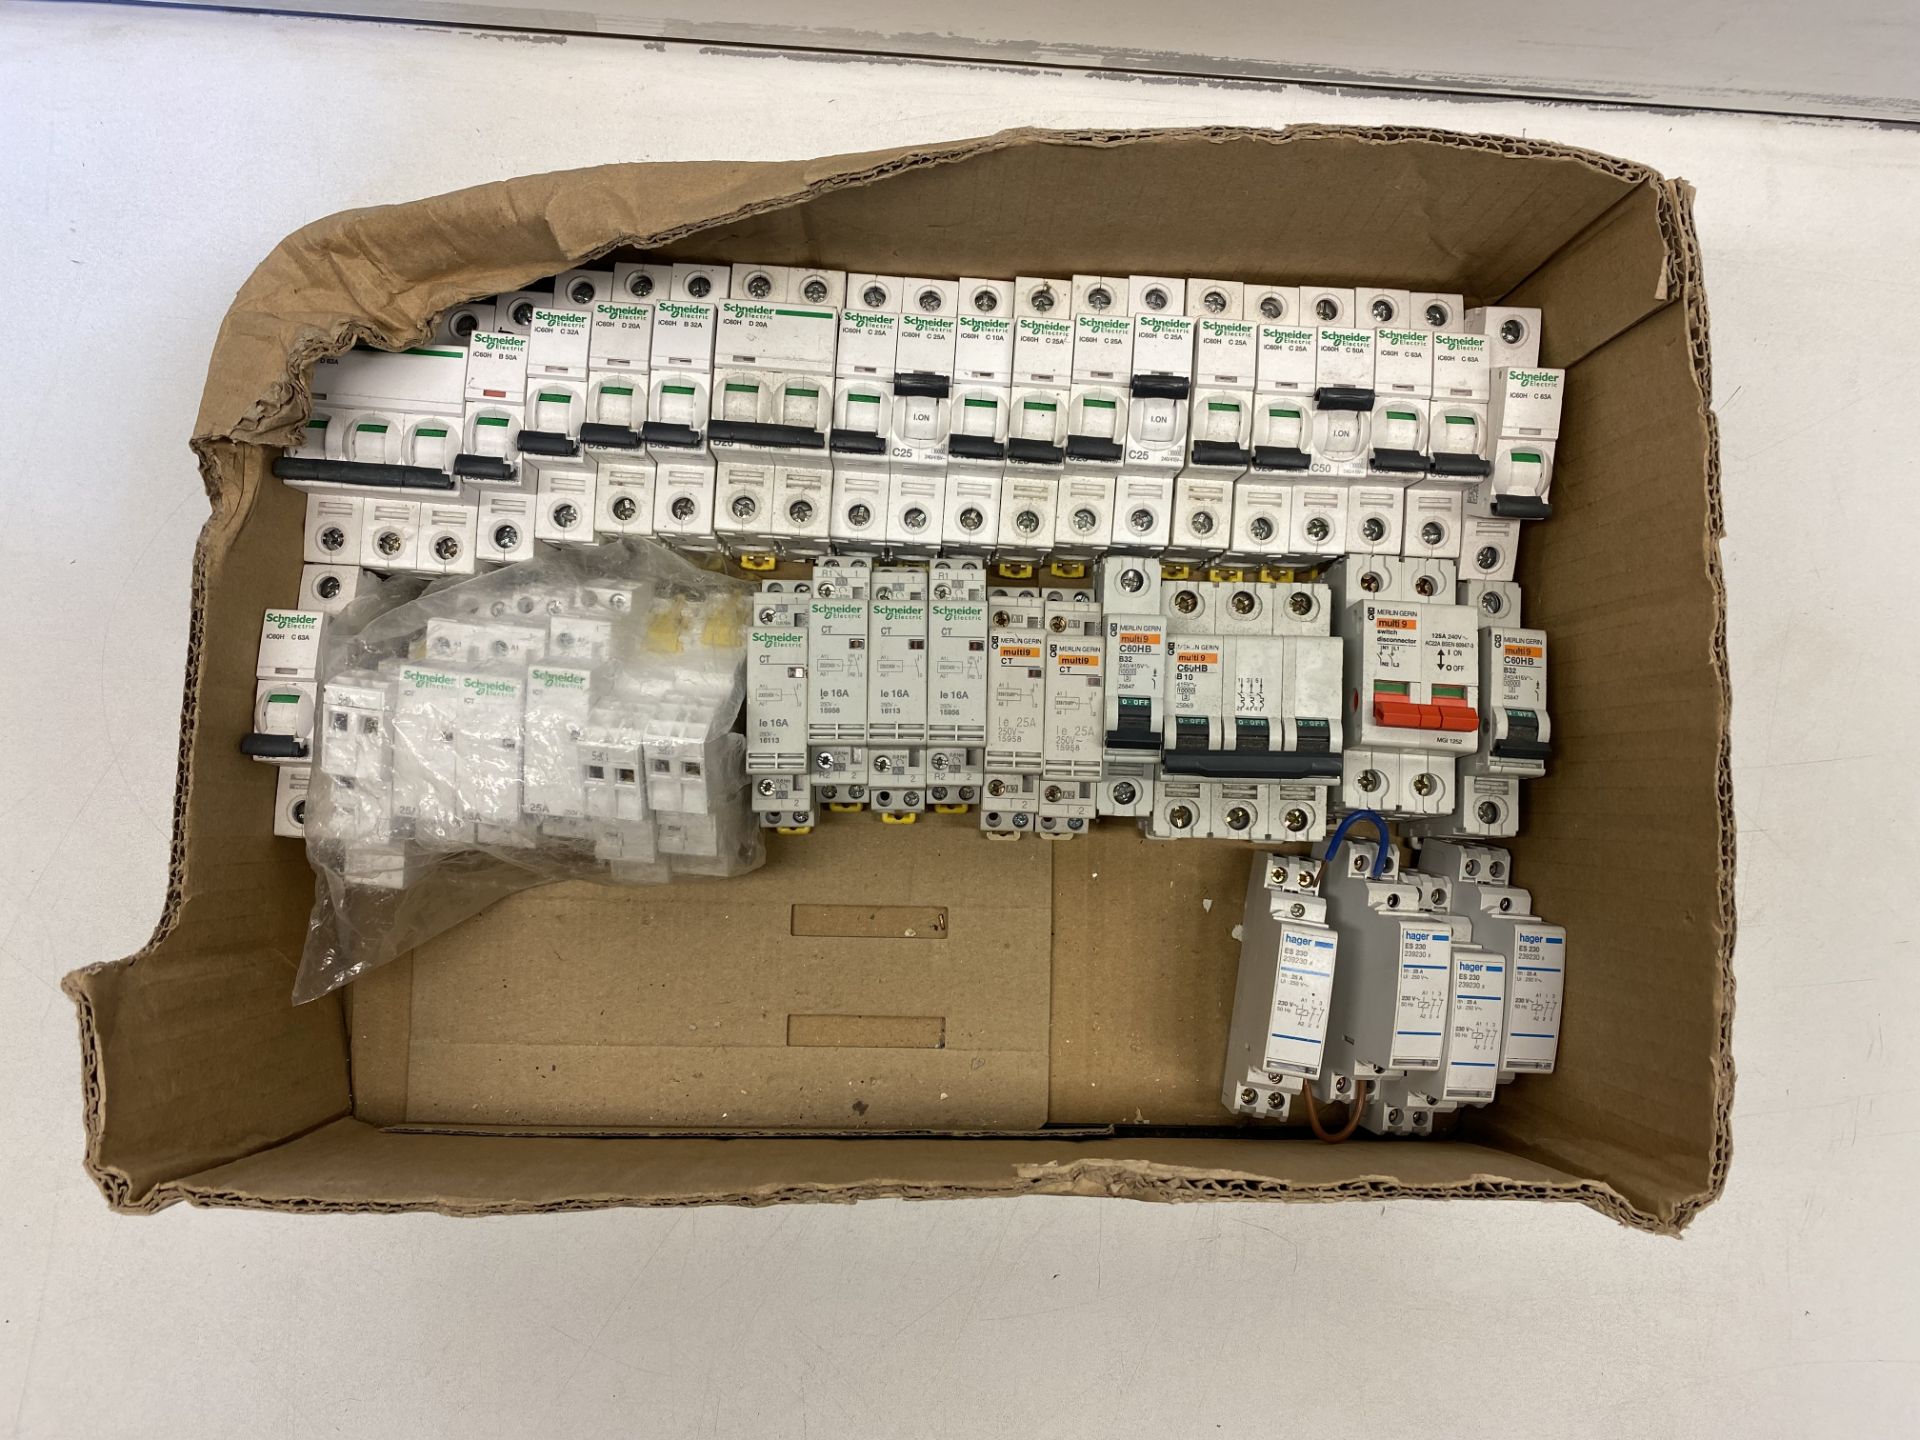 Quantity Of Various Schneider Electric, Merlin Gerin & Hager Mini Circuit Breakers - See Photos